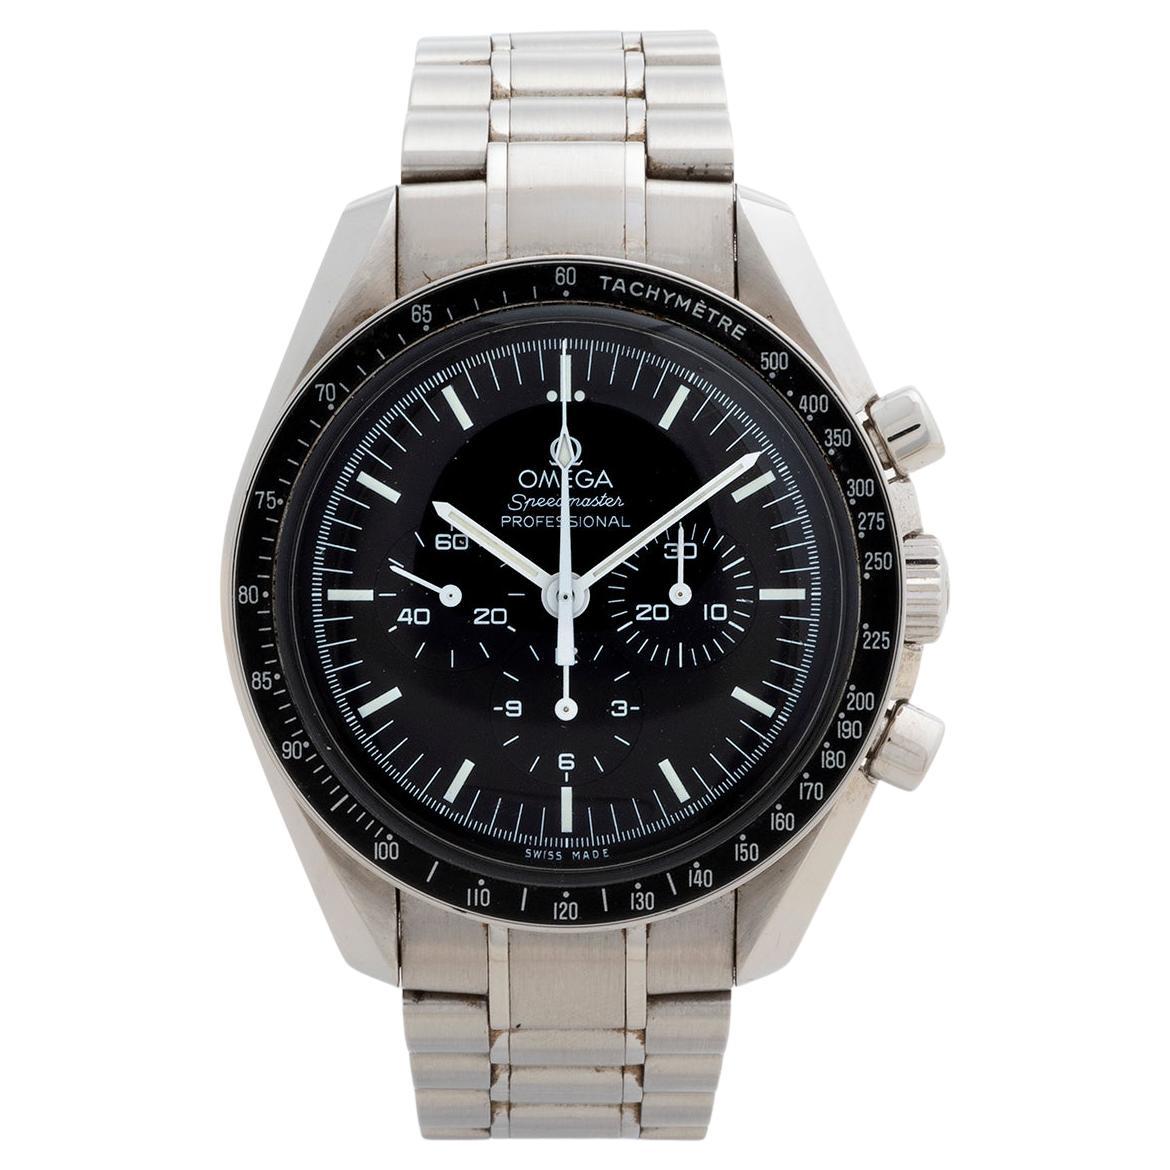 Omega Speedmaster Professional Moonwatch ref 37505000. (Discontinued). Année 2014.